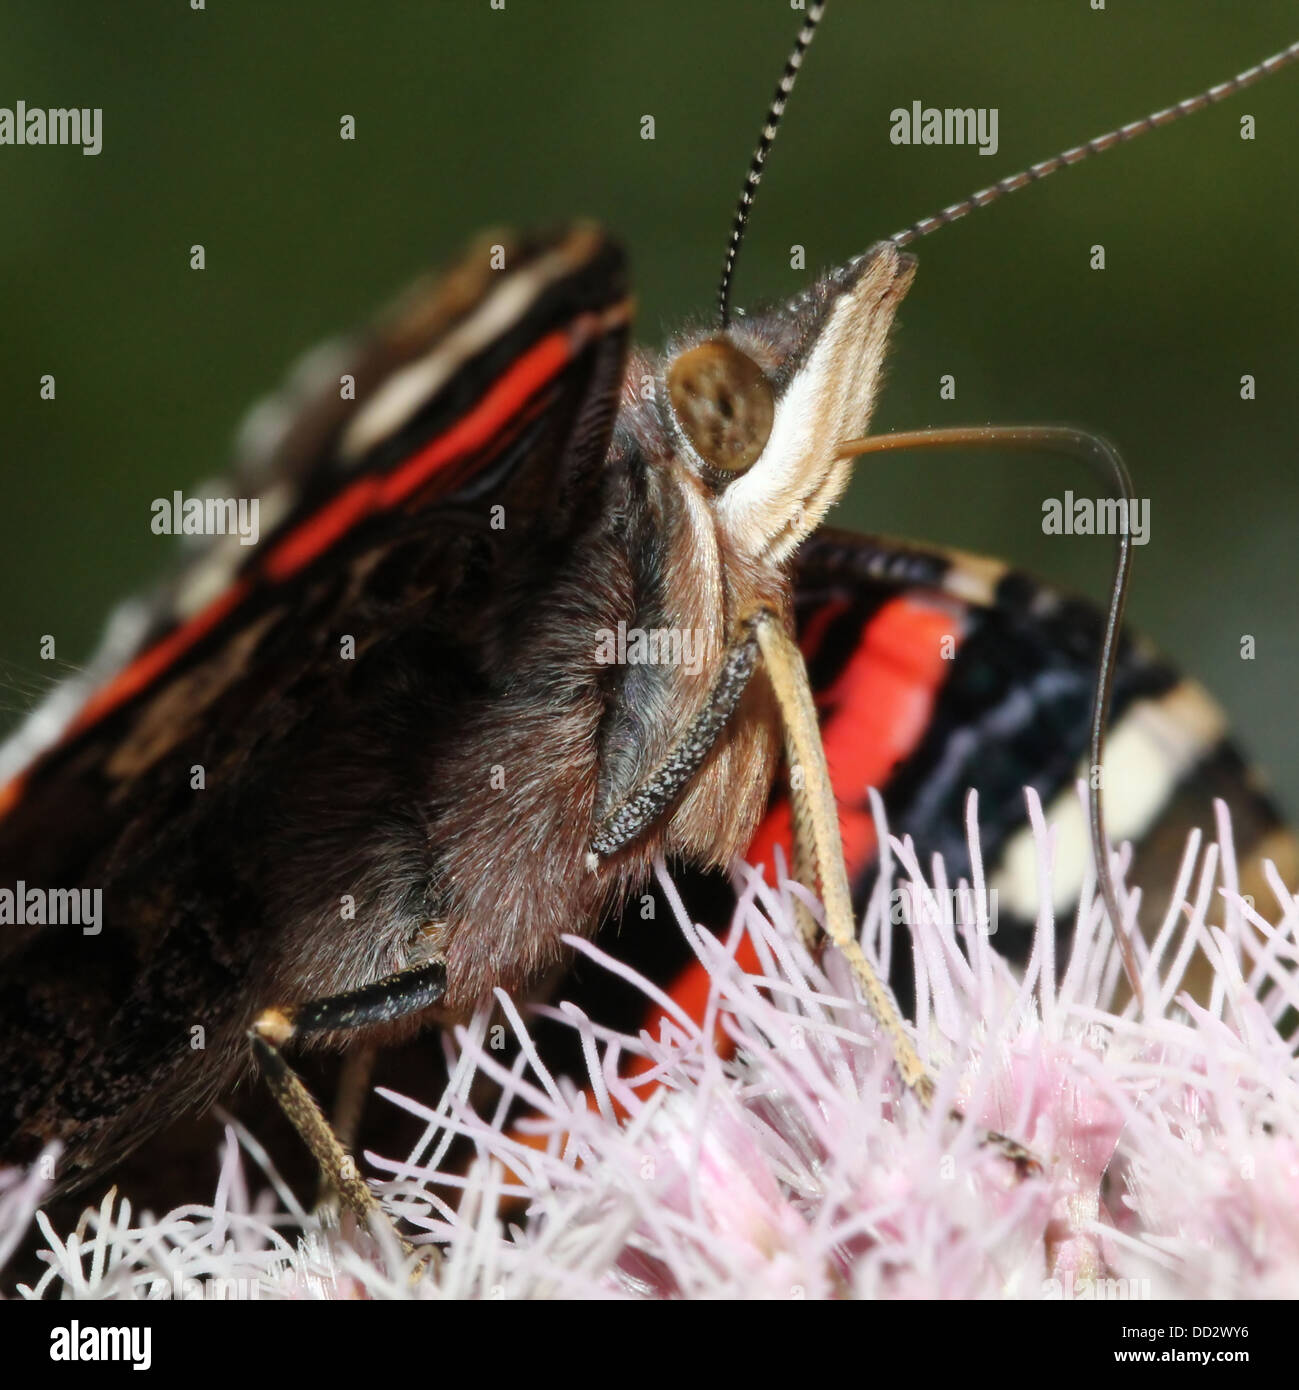 Extreme close-up of the head and upper body of  a Red admiral butterfly (vanessa atalanta) foraging on a flower Stock Photo